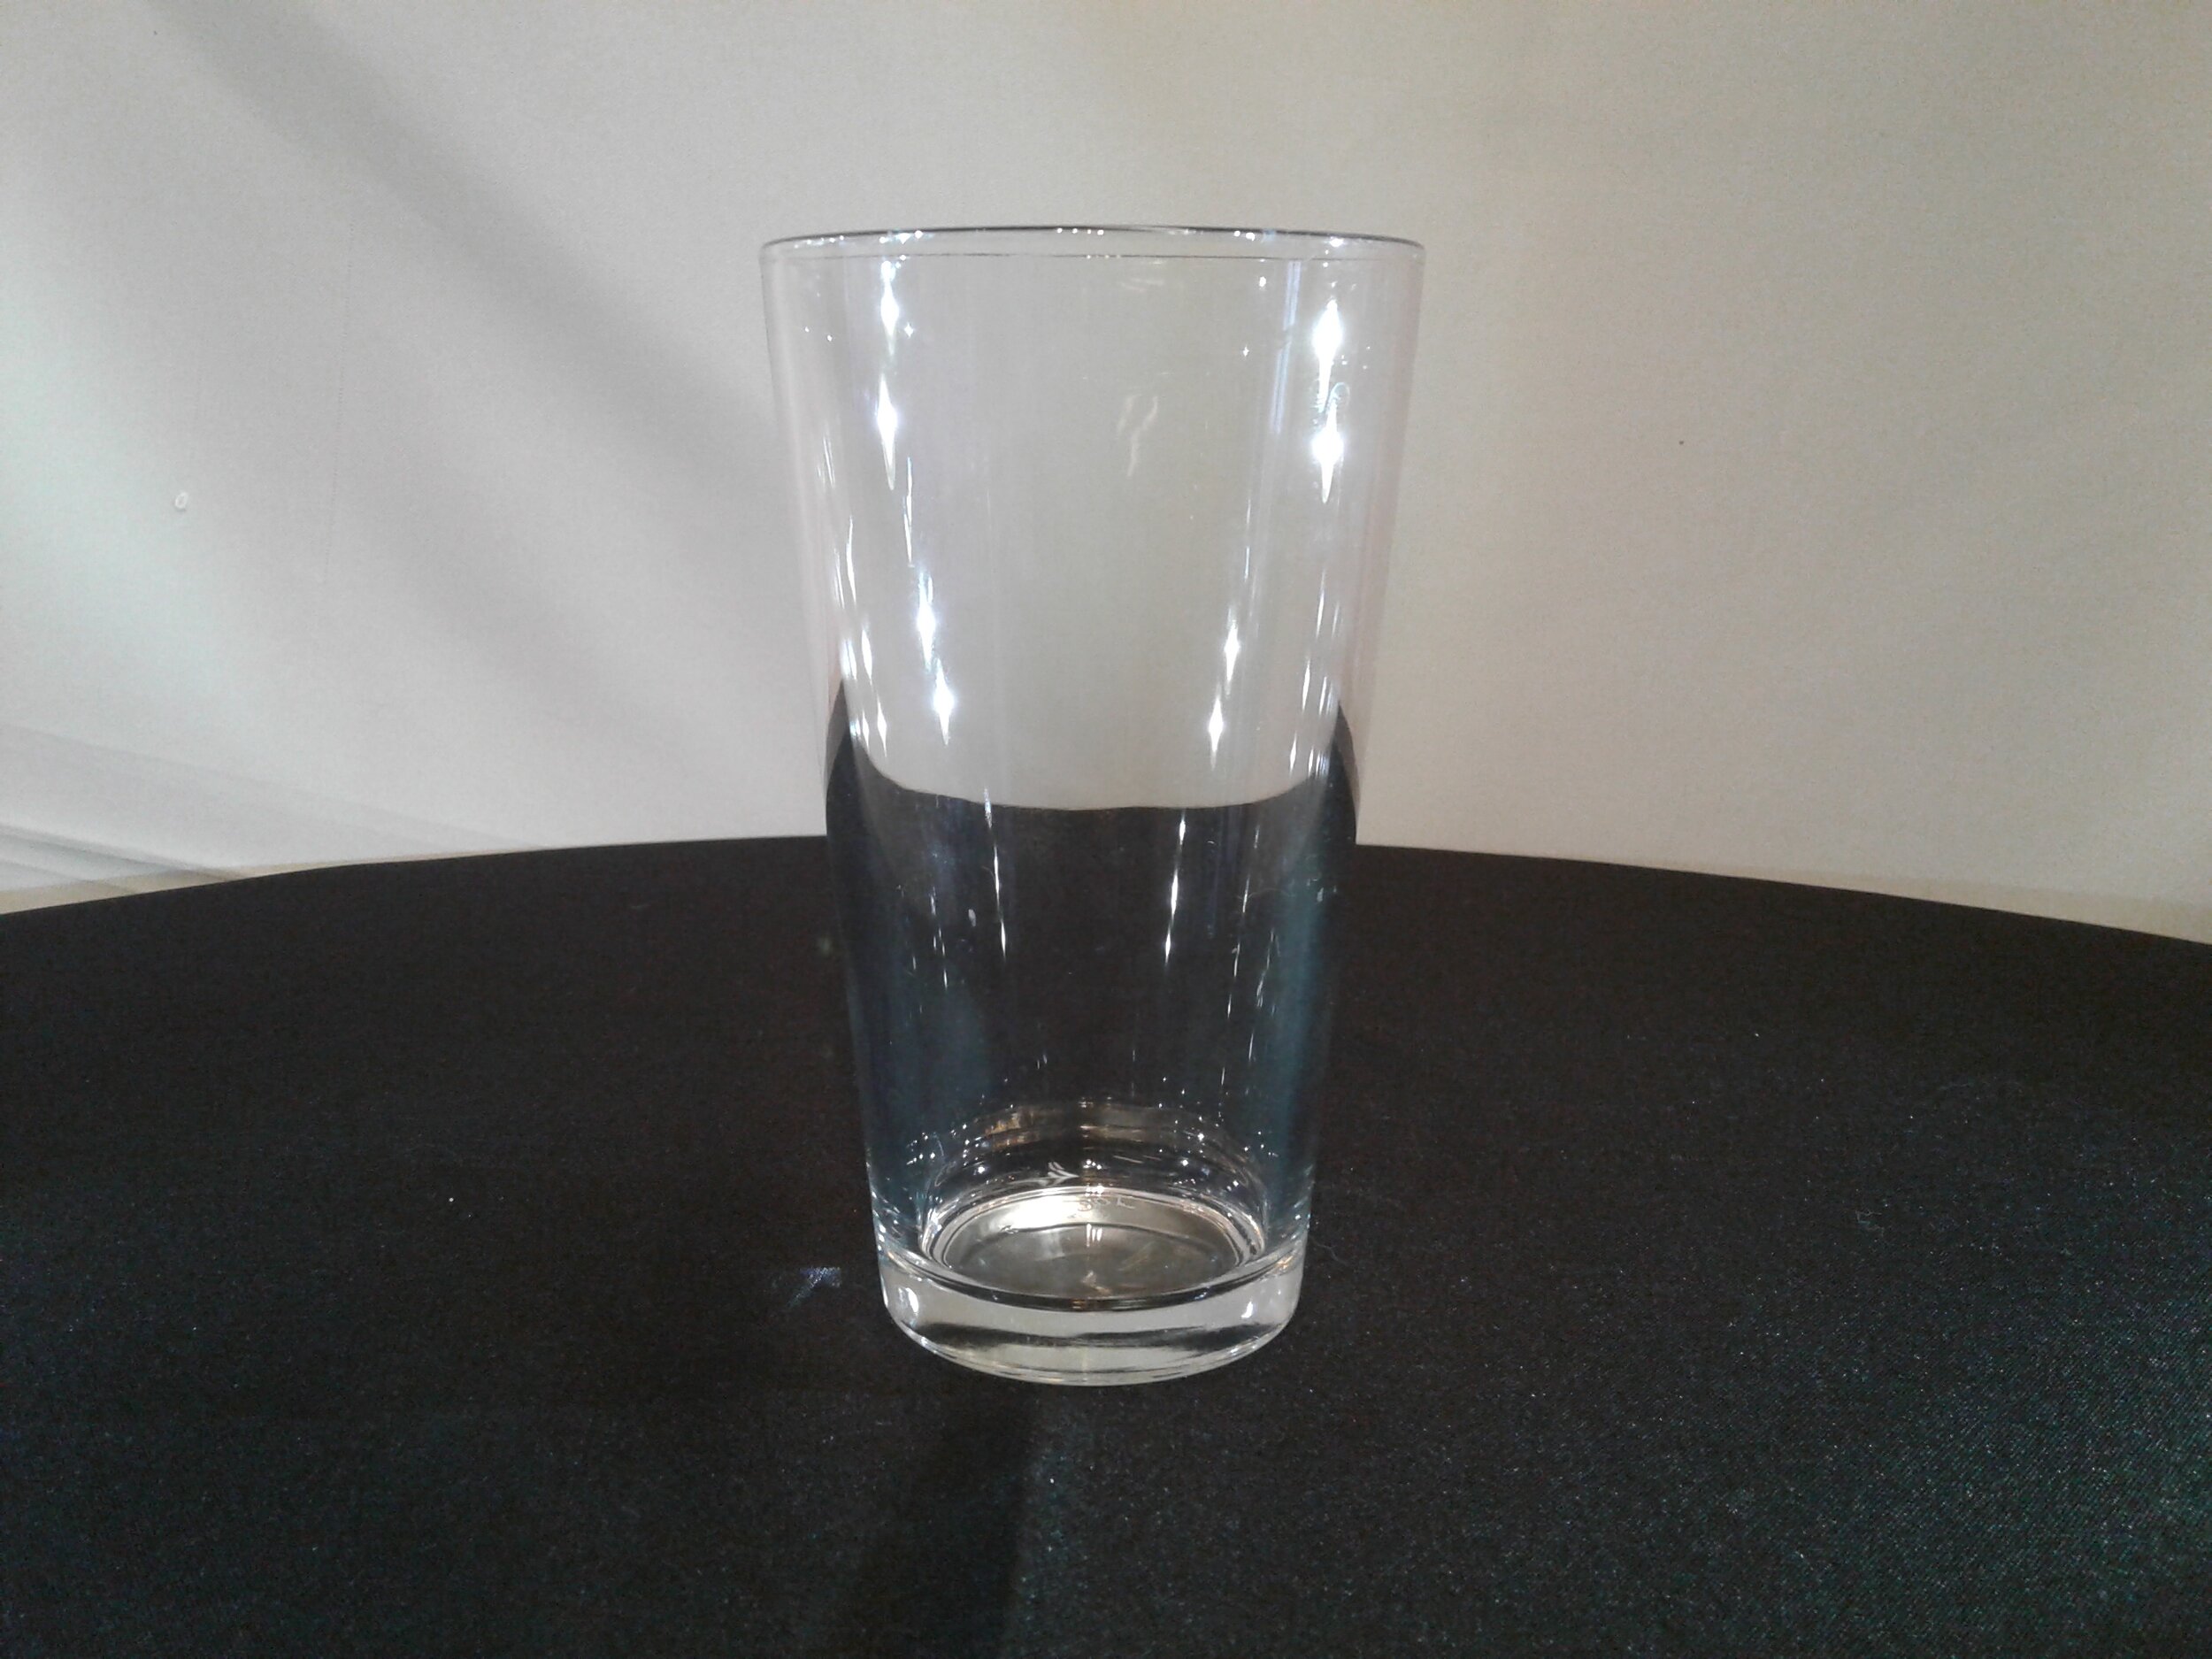 Pint Glass, $1.50 / day